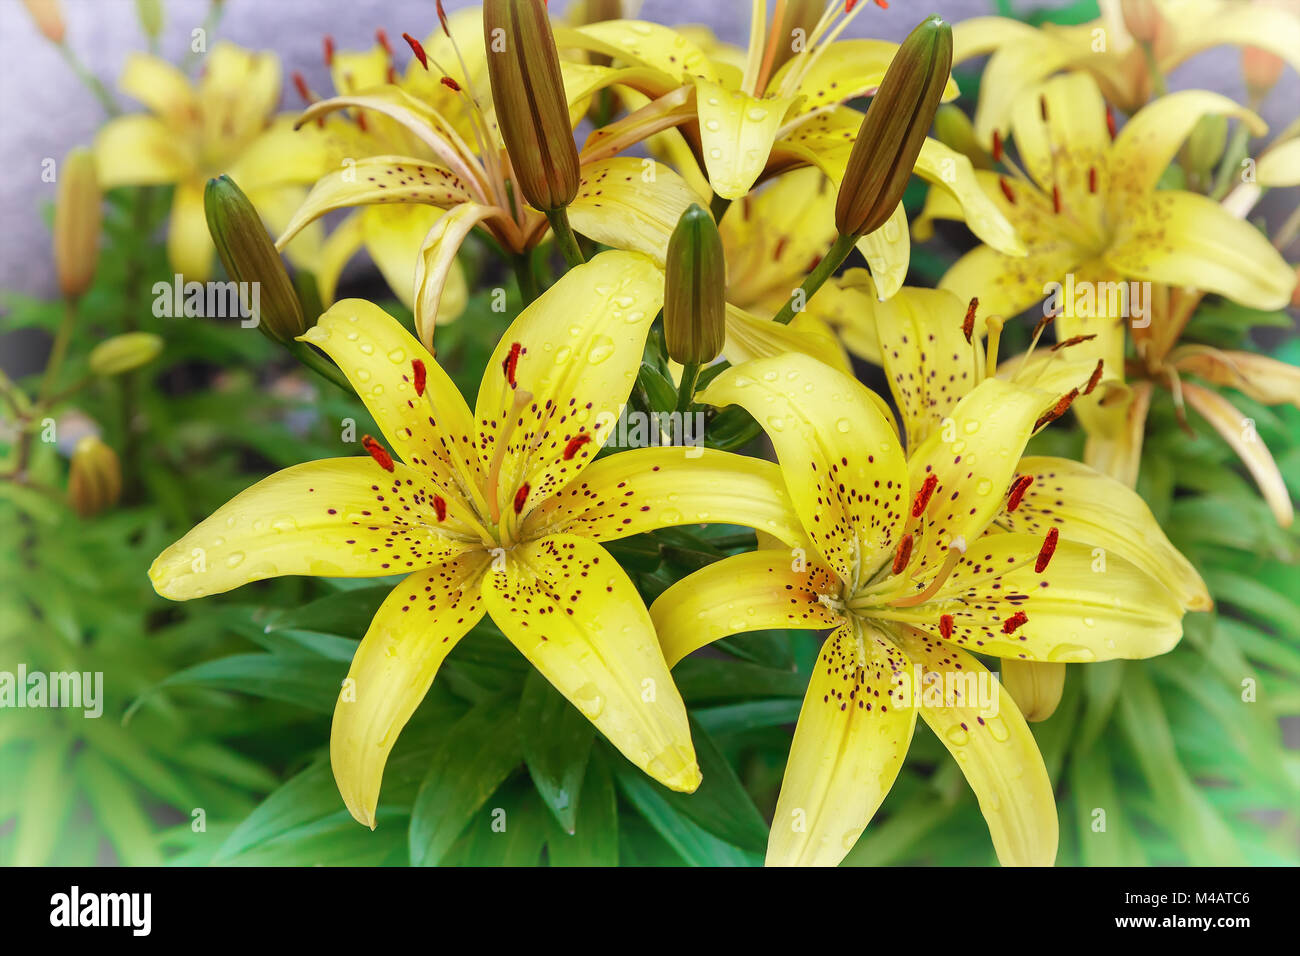 Yellow lilies blossom among the leaves so green Stock Photo